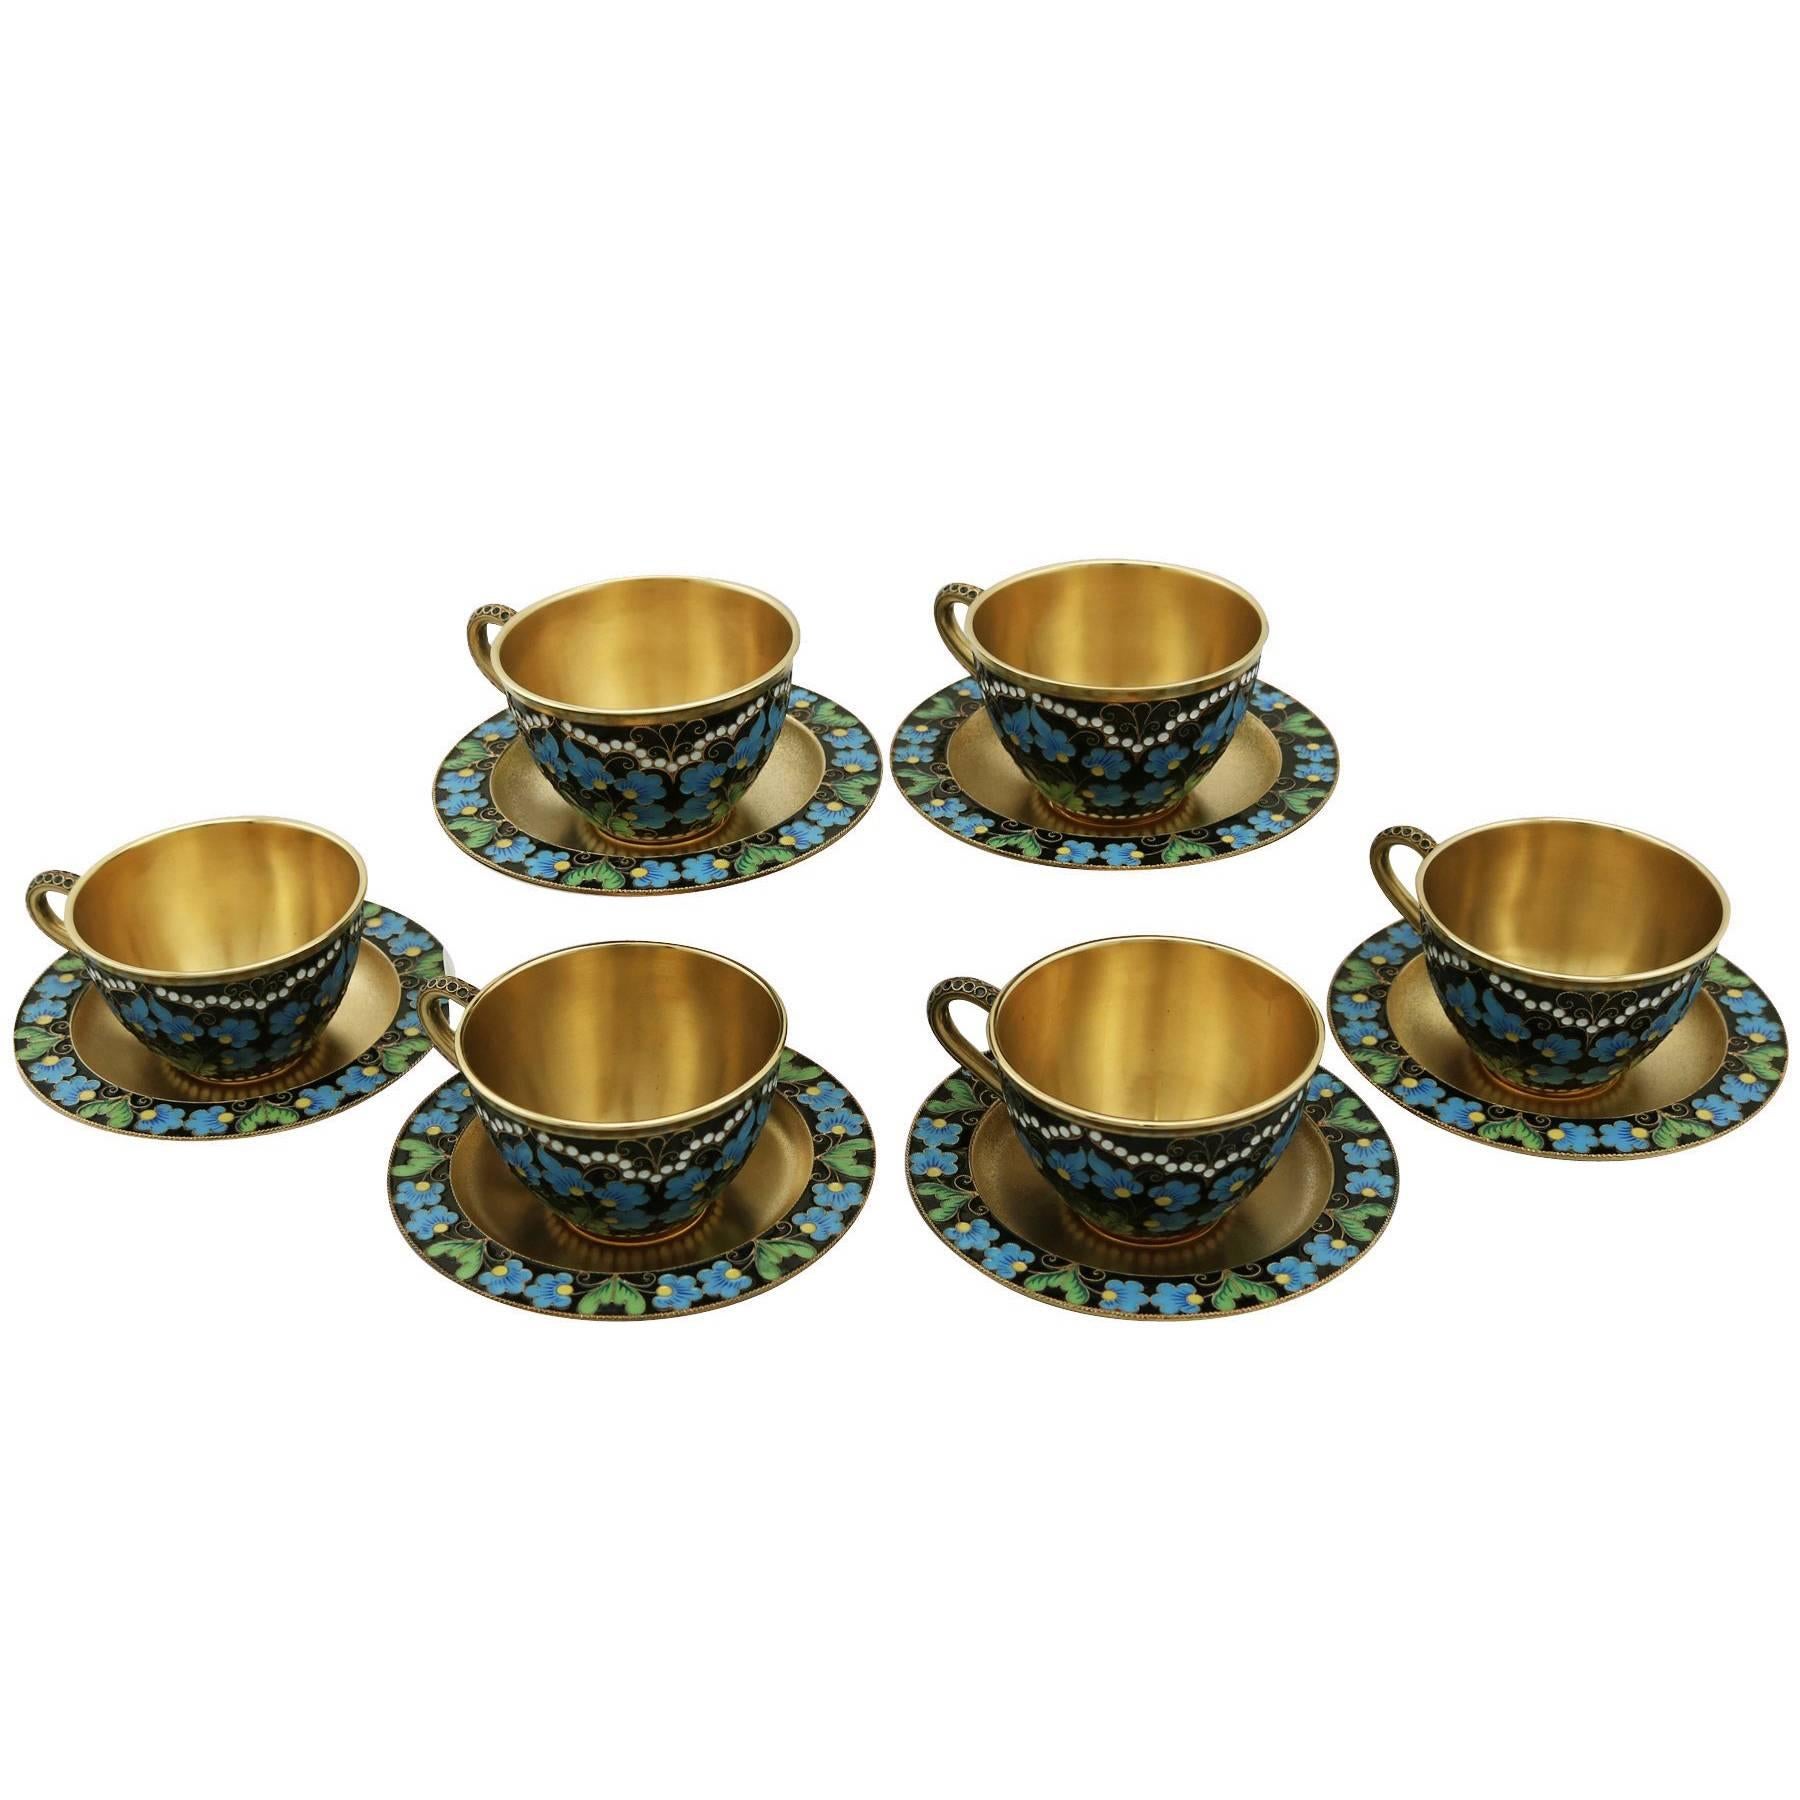 1970s Russian Silver Gilt and Polychrome Cloisonné Enamel Cups and Saucers Set